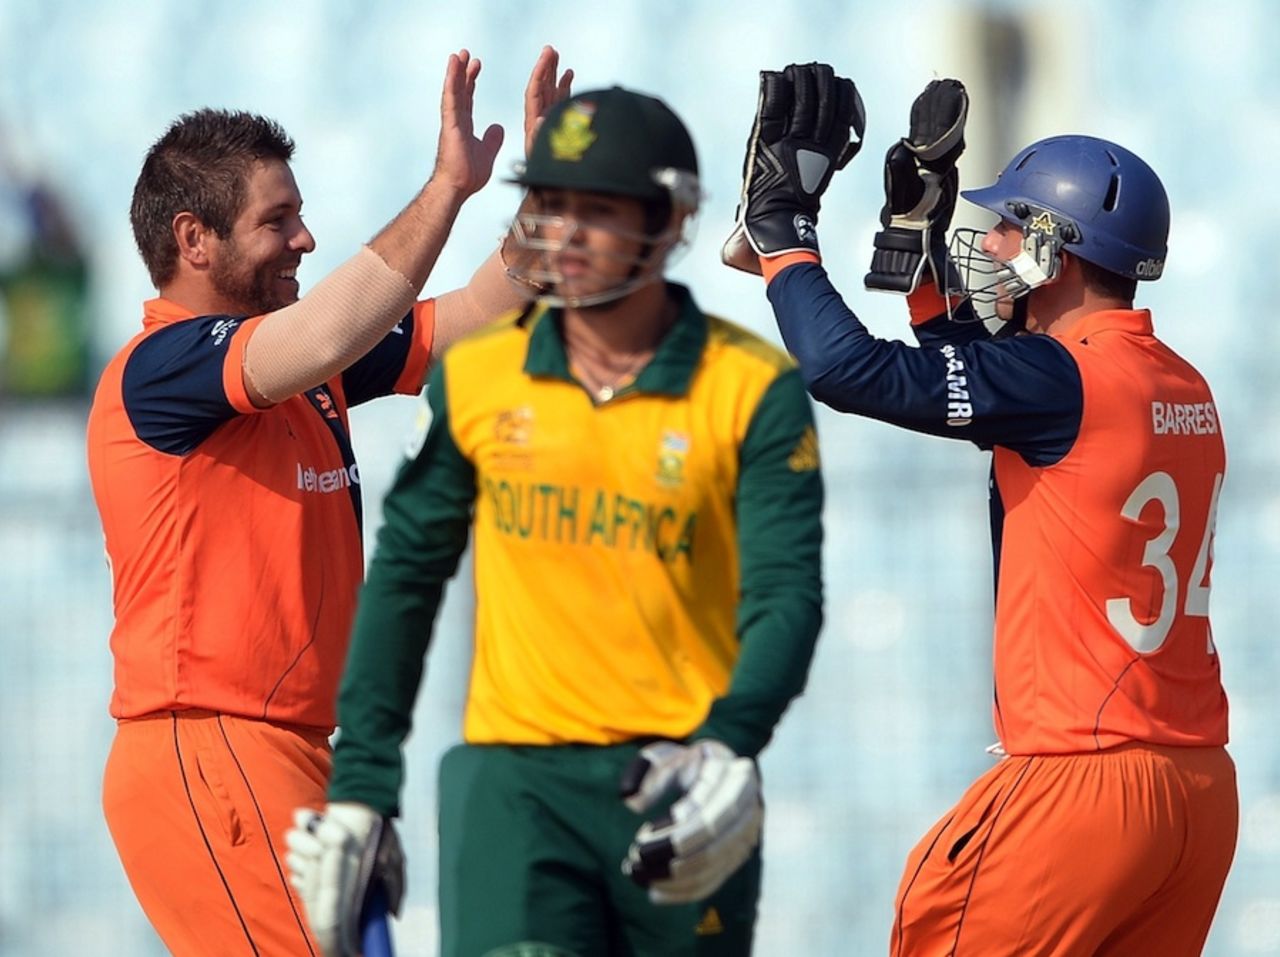 Michael Swart dismissed Quinton de Kock for a duck, Netherlands v South Africa, World T20, Group 1, Chittagong, March 27, 2014